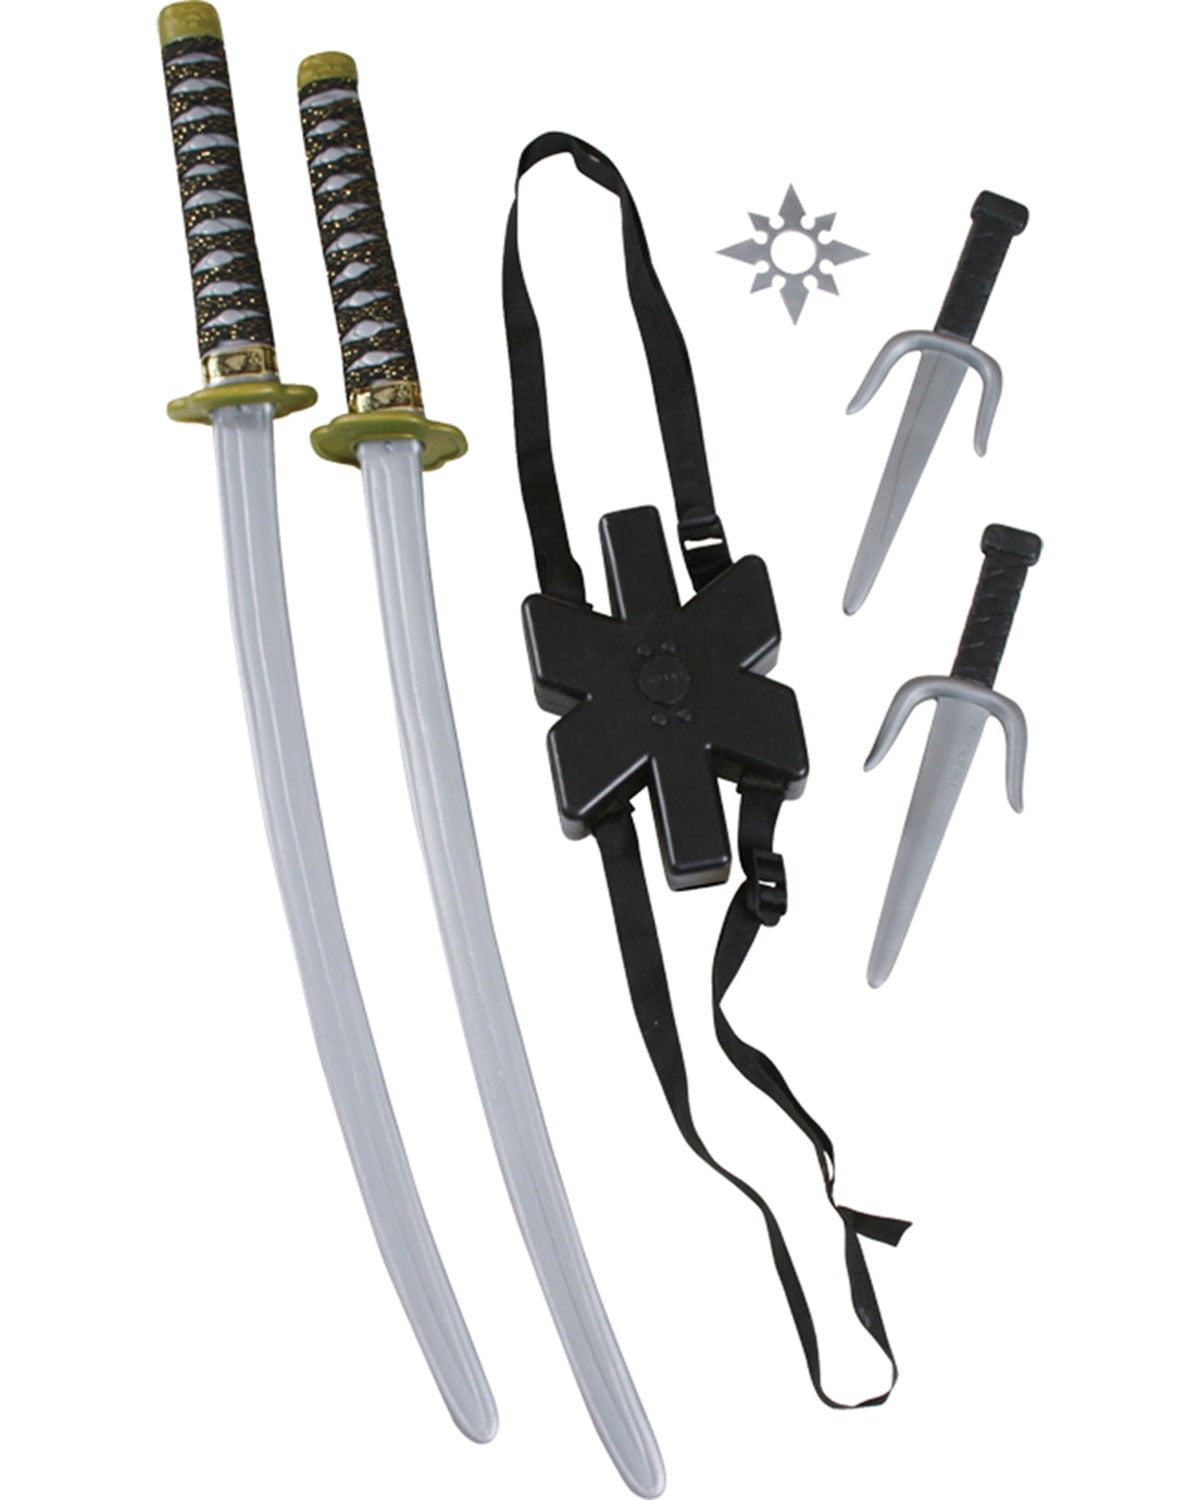 Warrior Samurai Pirate Plastic Toy Weapon Sword Costume Accessory With Holster 